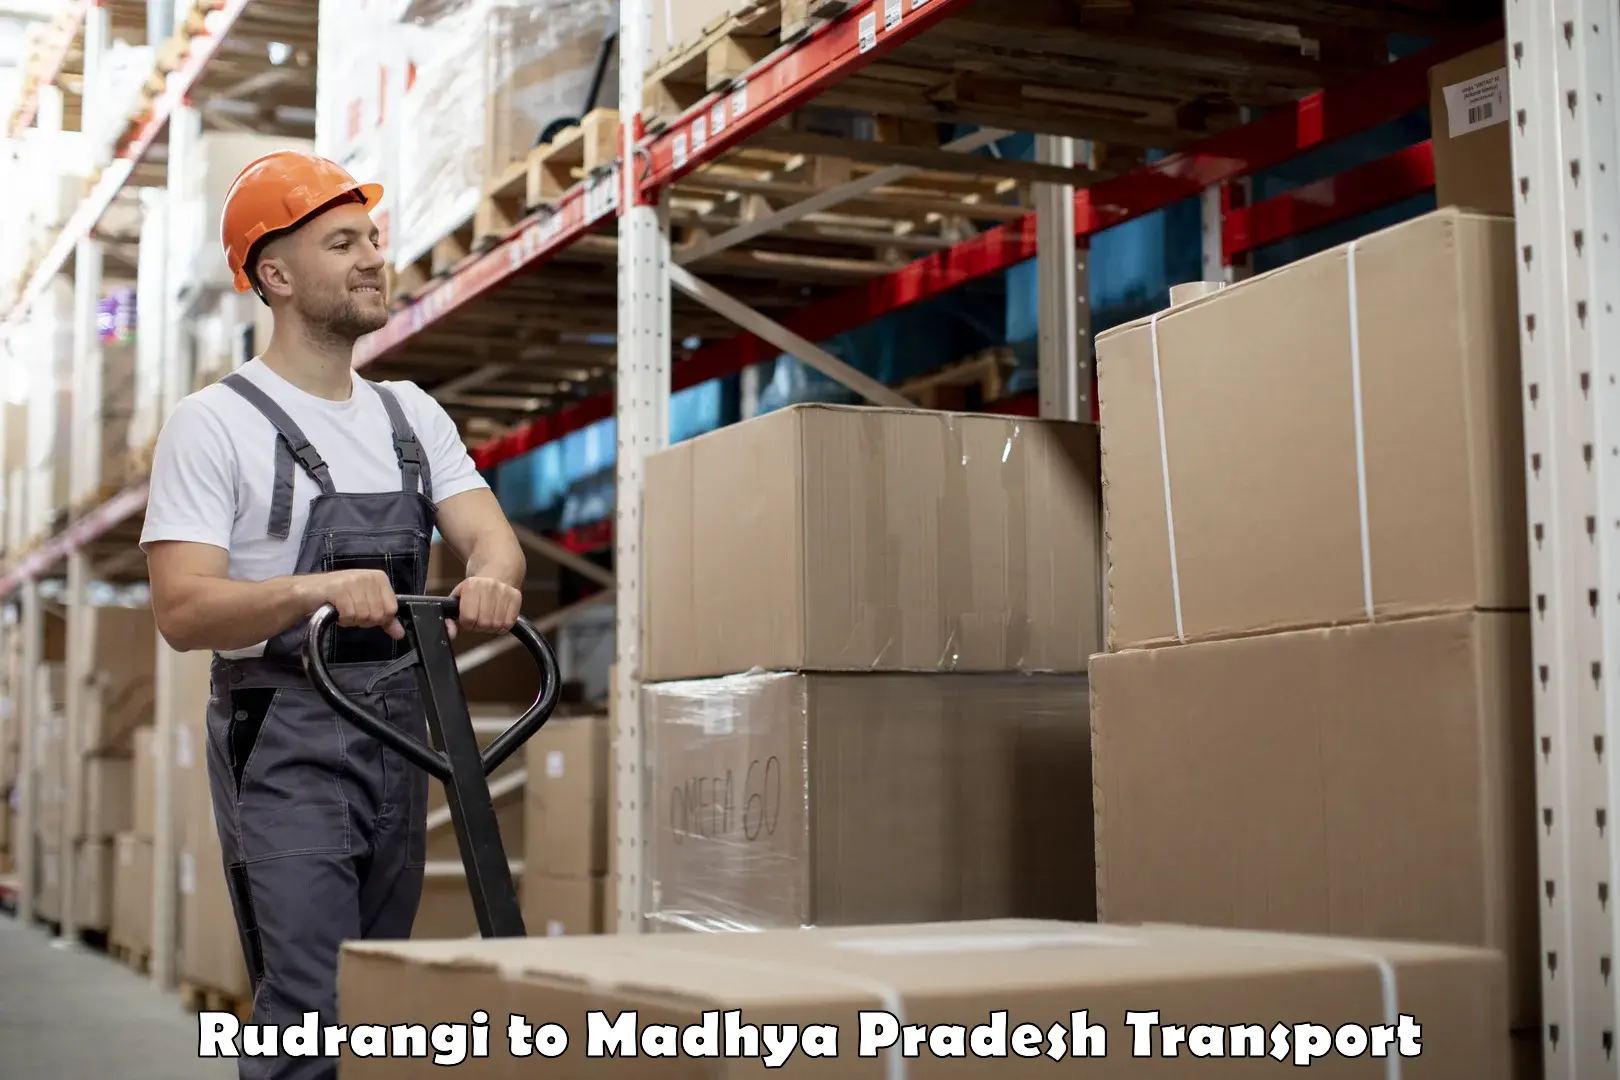 Truck transport companies in India in Rudrangi to IIIT Bhopal